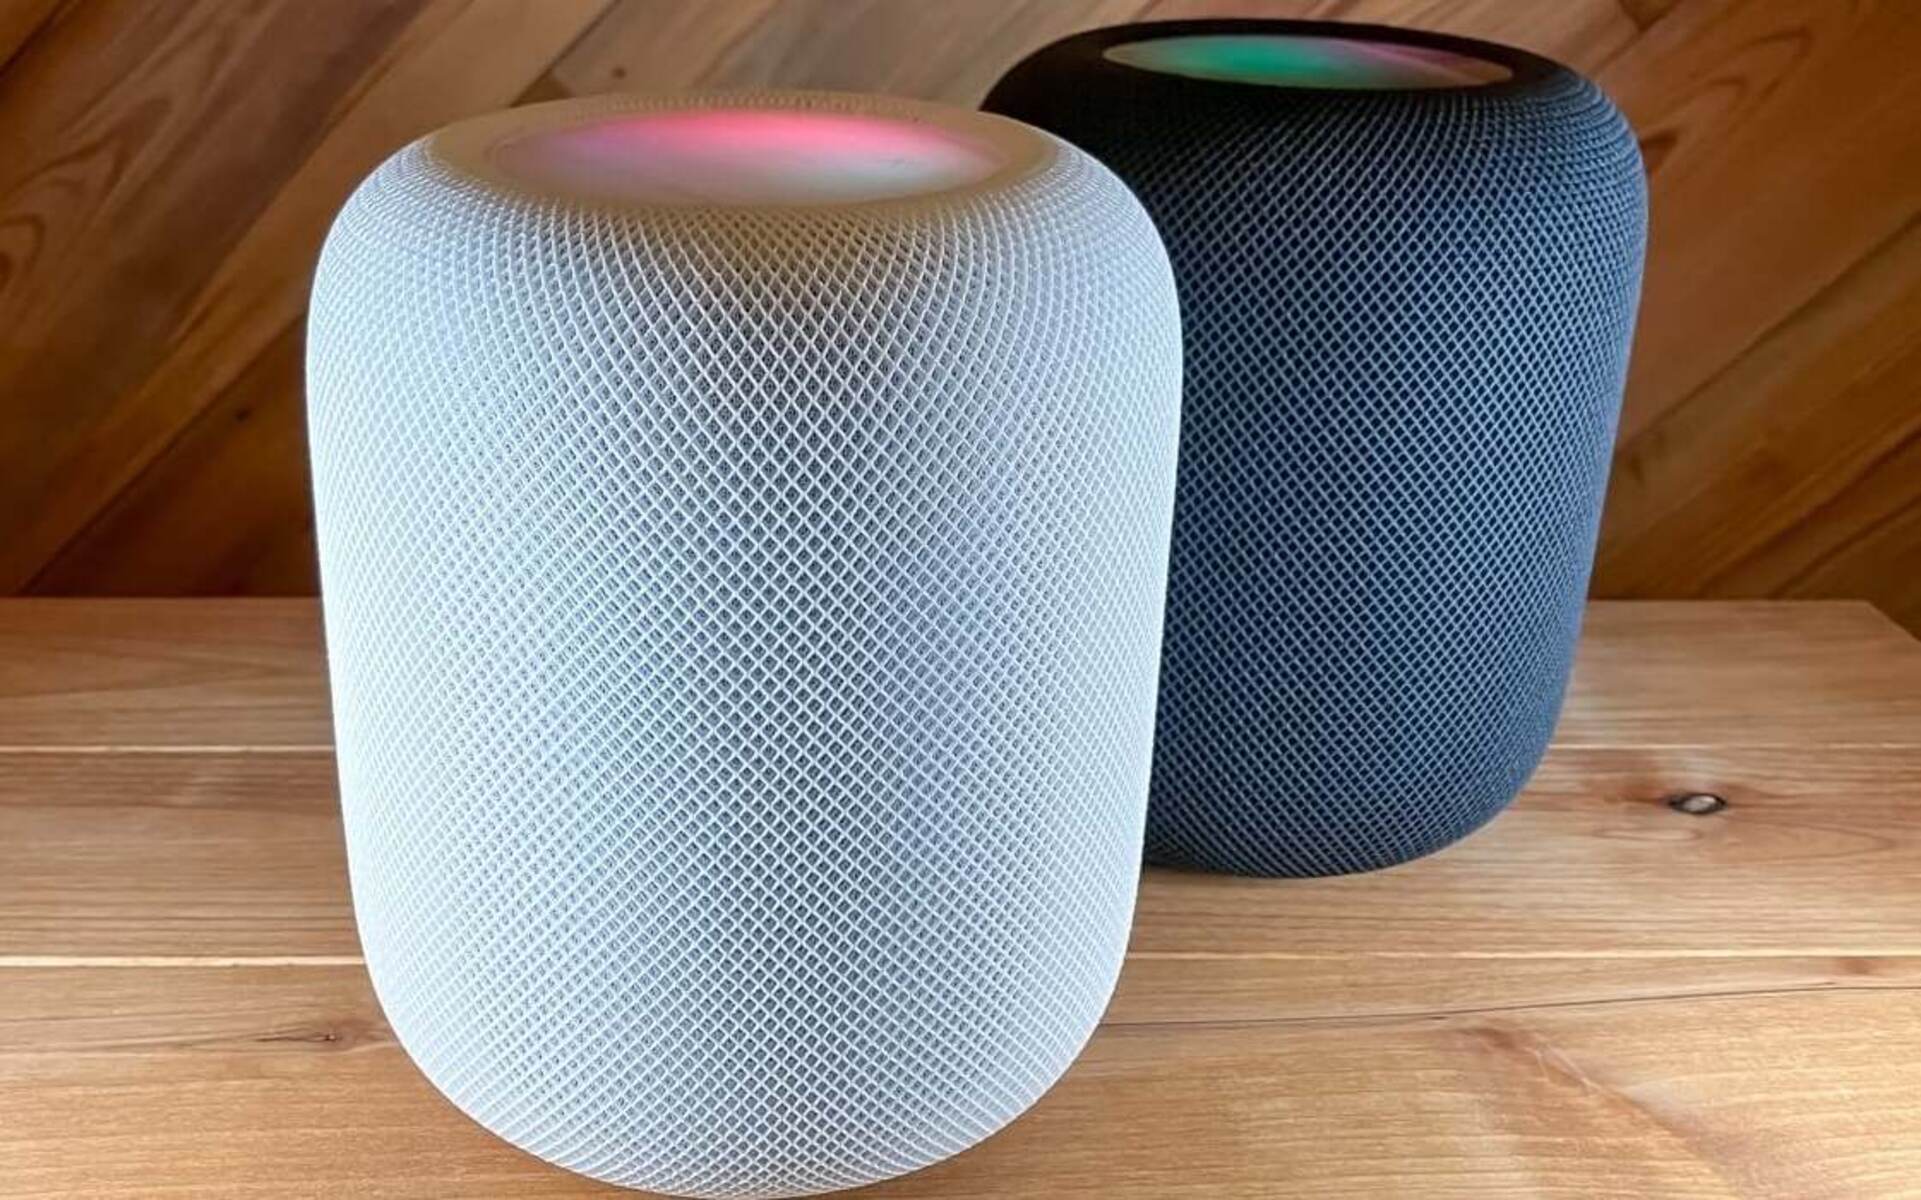 Who Else Is Coming Out With A Smart Speaker